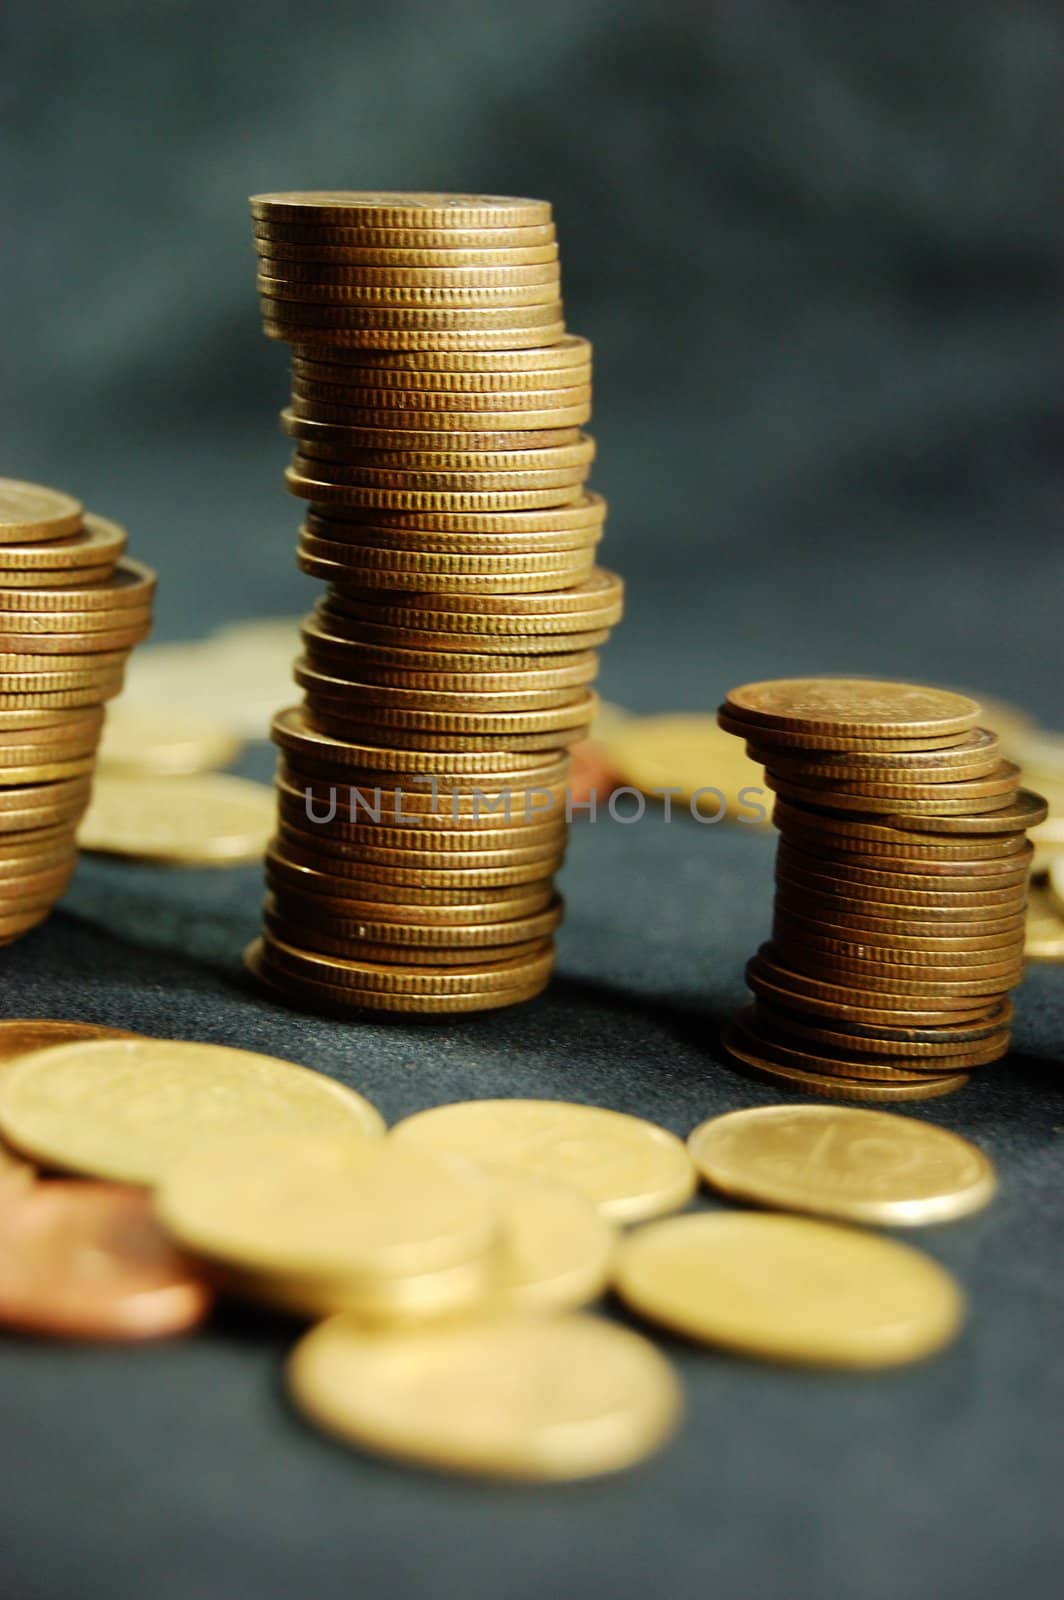 A pile of golden coins on dark background